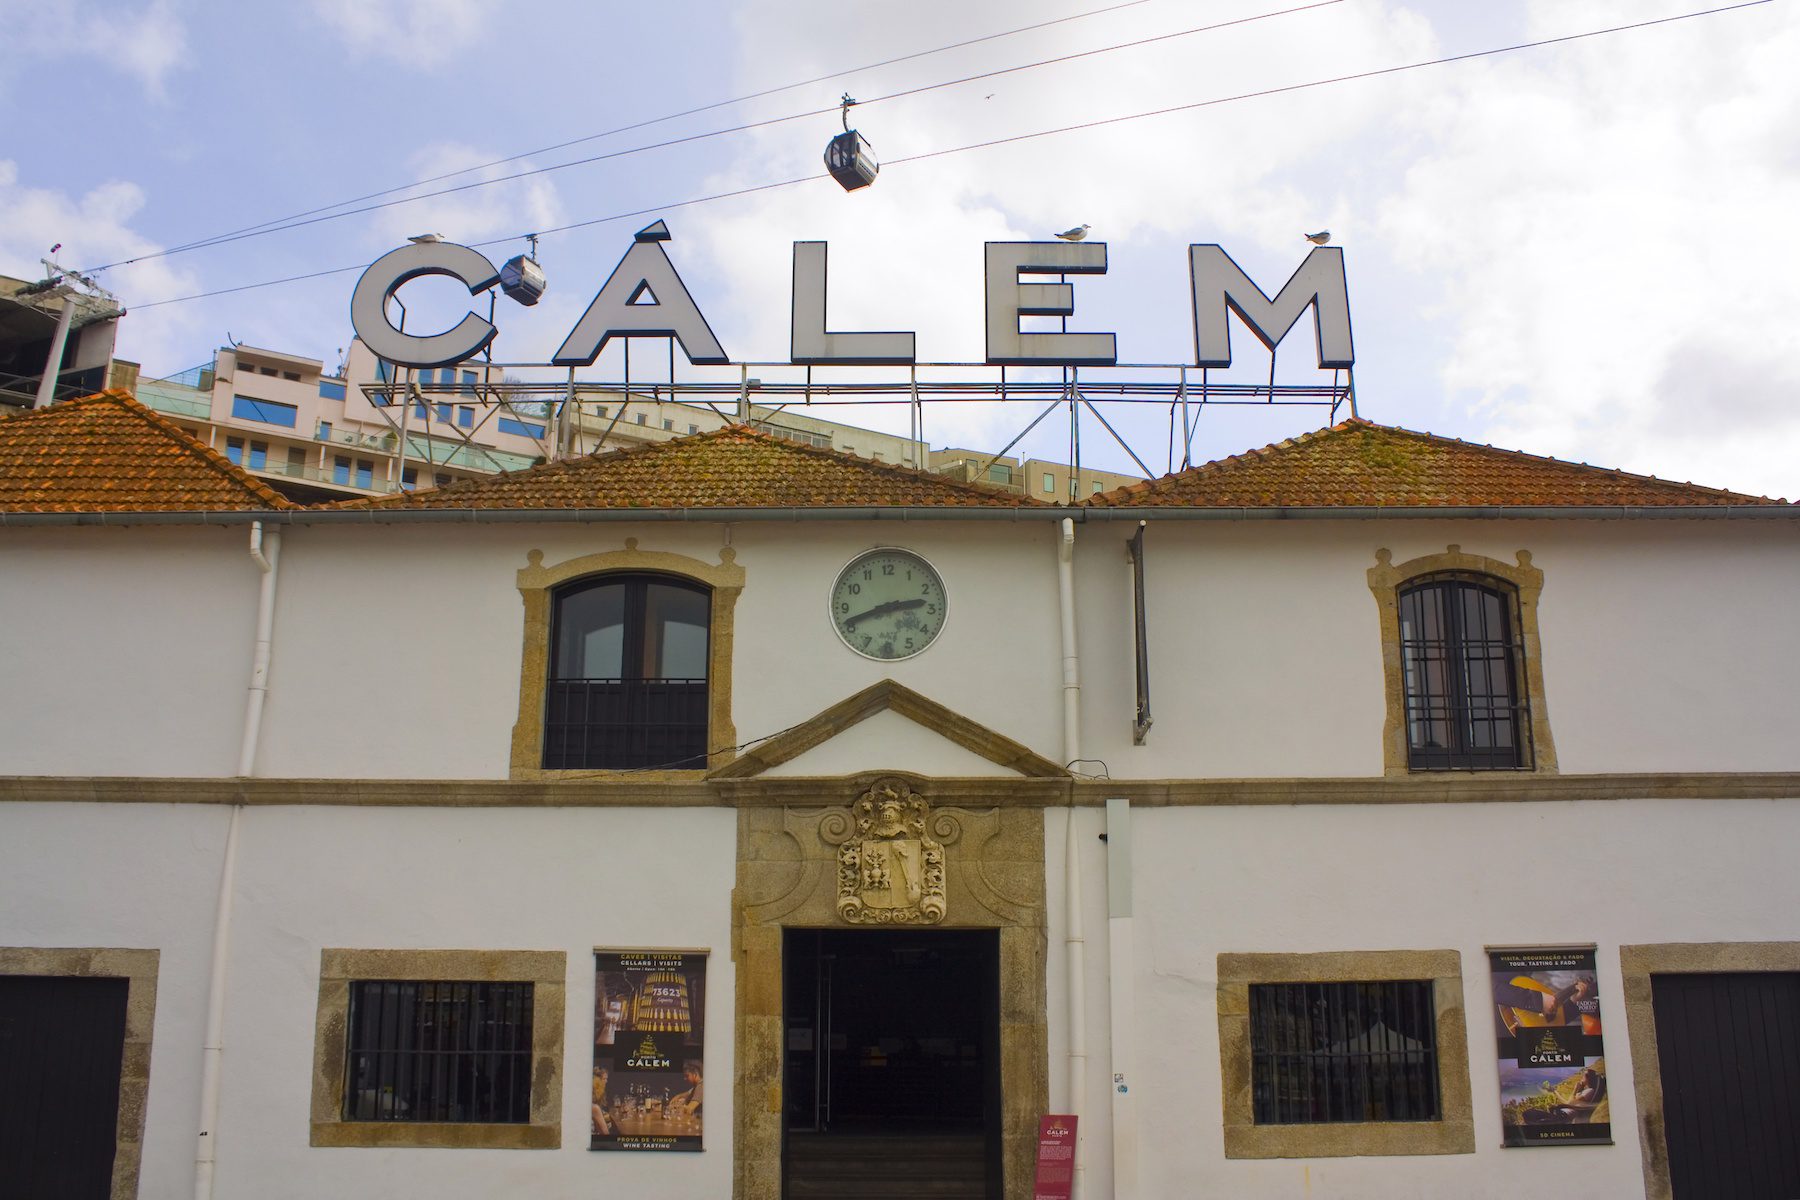 A large sign of "Calem" is displayed atop a white building with a golden brown roof at Calem Winery in Portugal